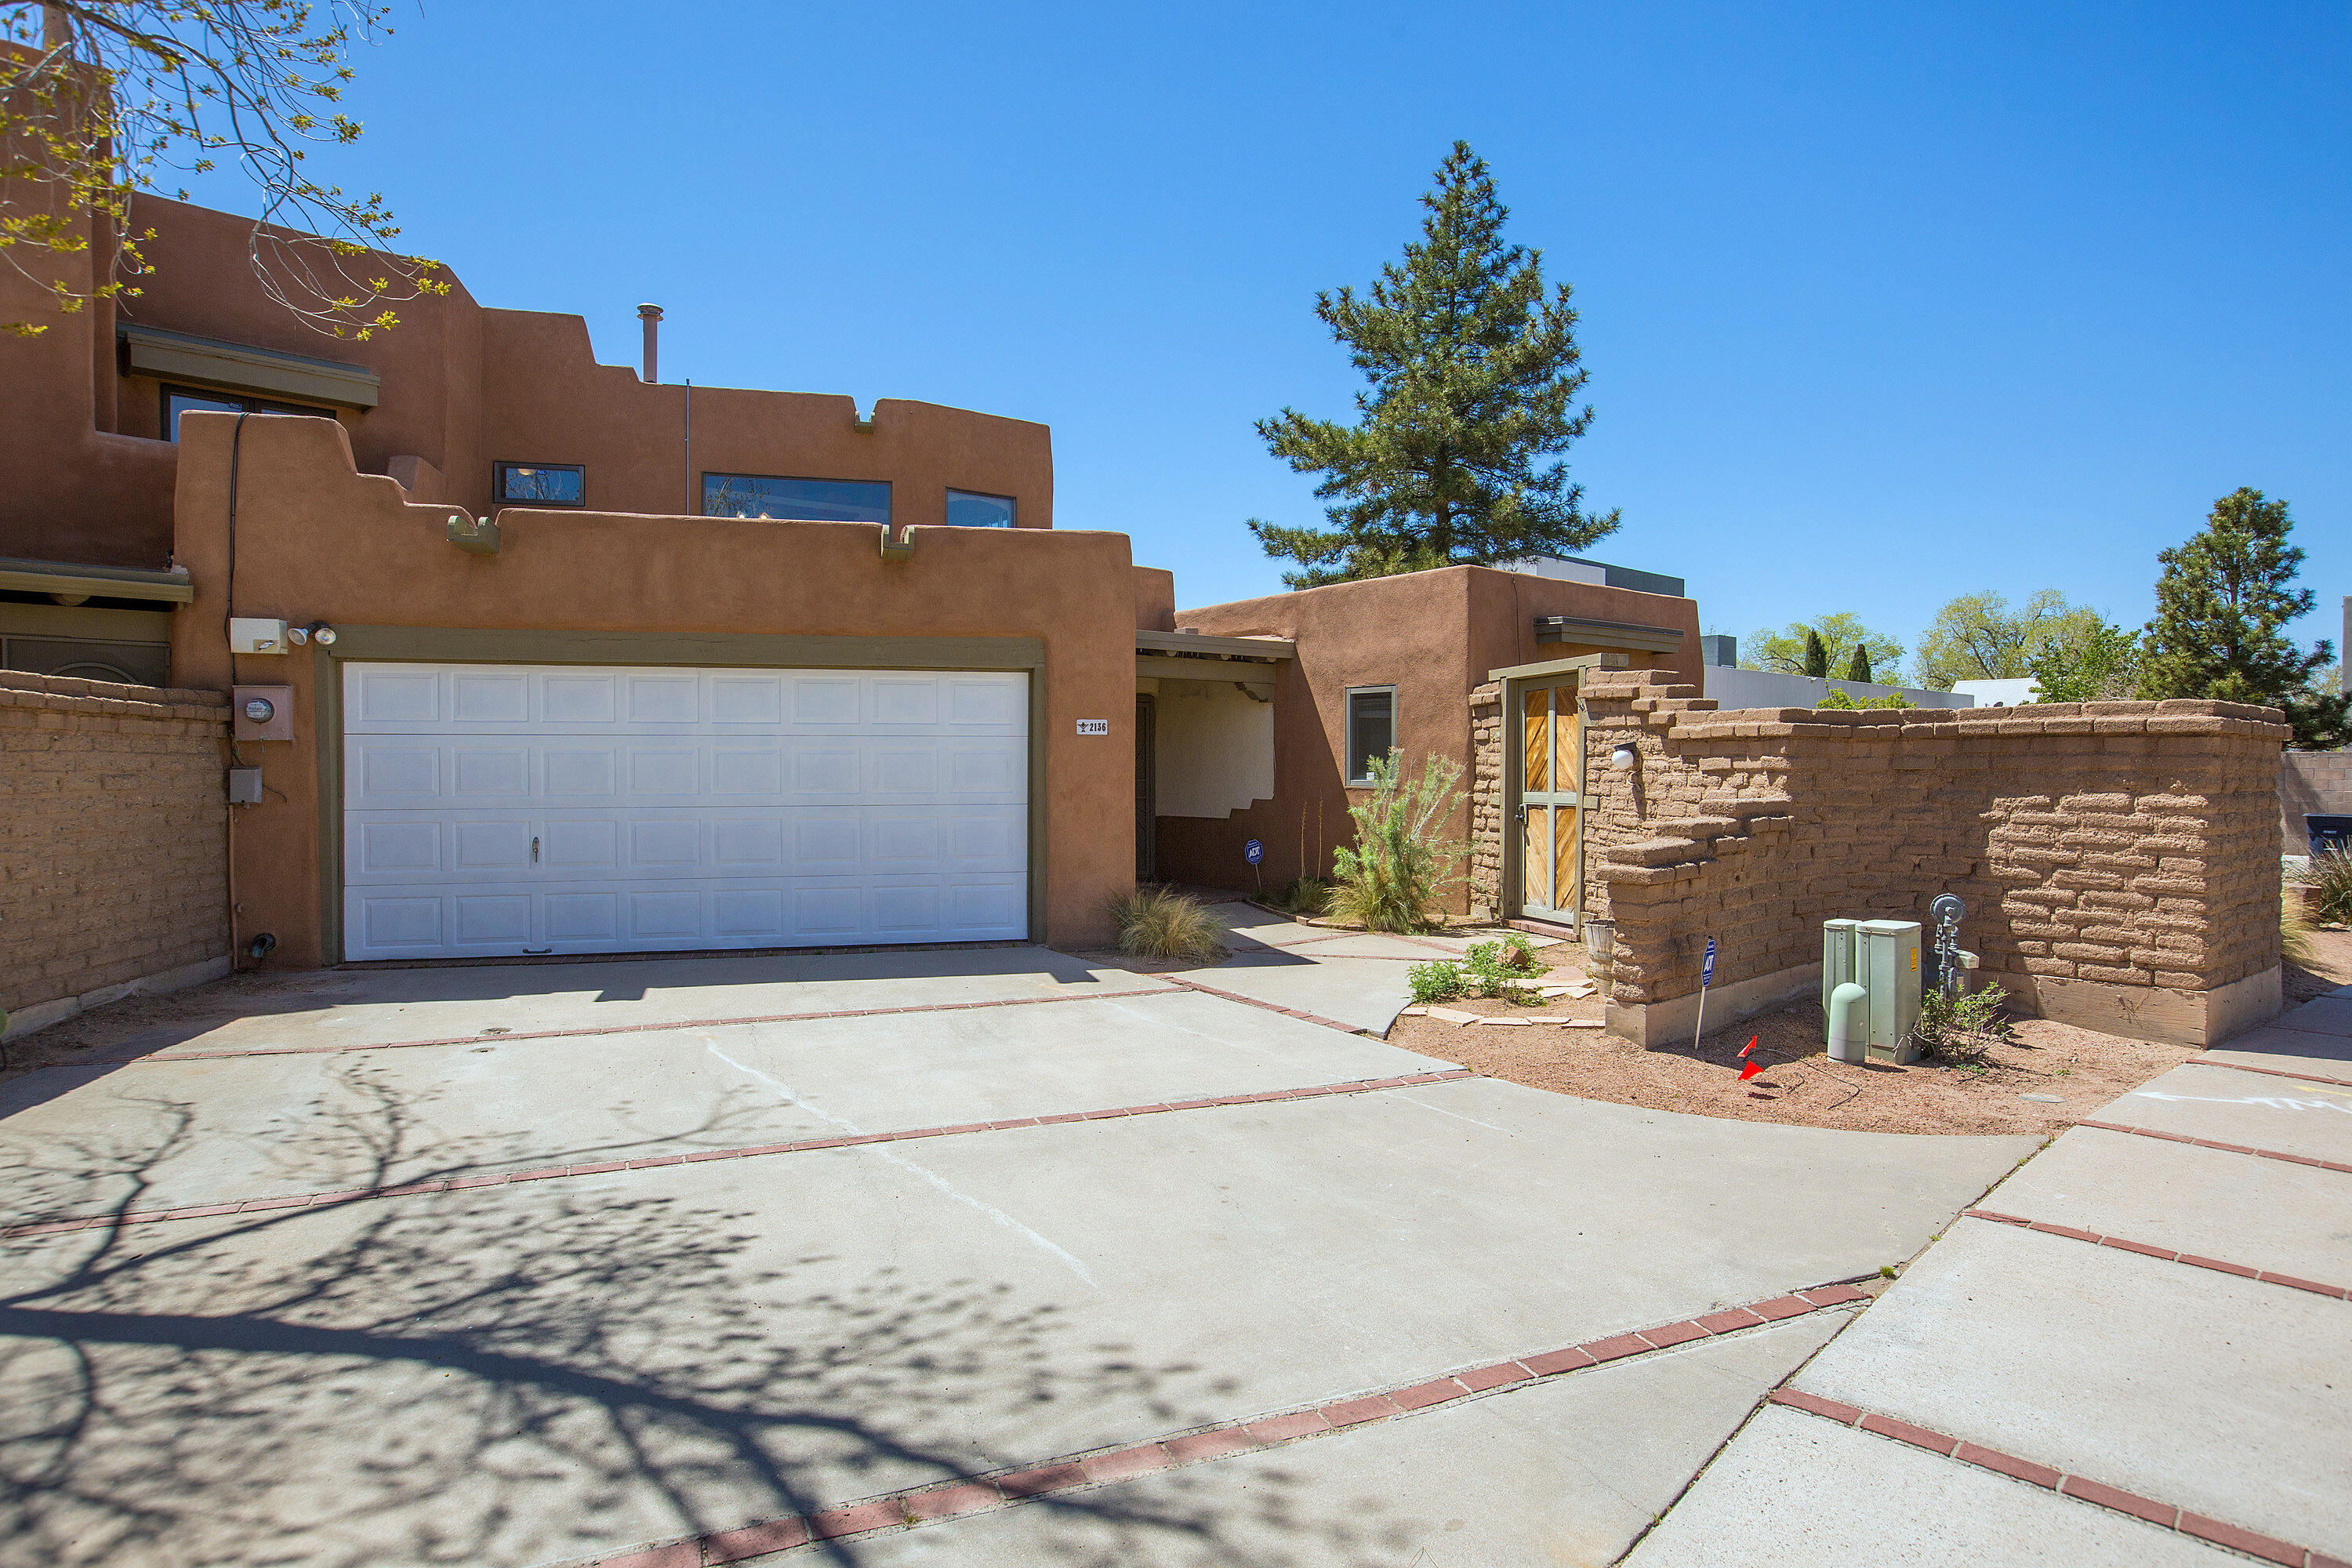 Fabulous Custom Pueblo-Style Townhome in desirable North Valley! Brick floors, authentic kiva fireplace, wood ceilings are Southwest Signatures to this amazing Adobe home! There are 3 bedrooms, 2 bathrooms and a 2-car garage plus refrigerated air! The spacious owner's suite is private and upstairs. Built-in bookshelves and wood beam ceilings plus a Trobe wall with exposed Adobe blocks invite you to stay!  Covered patio and private back yard lend to the North Valley vibe. The private courtyard off the third bedroom provides a tranquil morning coffee spot. Excellent proximity to Bosque trails, Flying Star, The Range Cafe and Las Montanitas Co-Op plus easy access to I-40, Coffee Shops, Downtown, Old Town, Sawmill District, shopping, medical care and more!